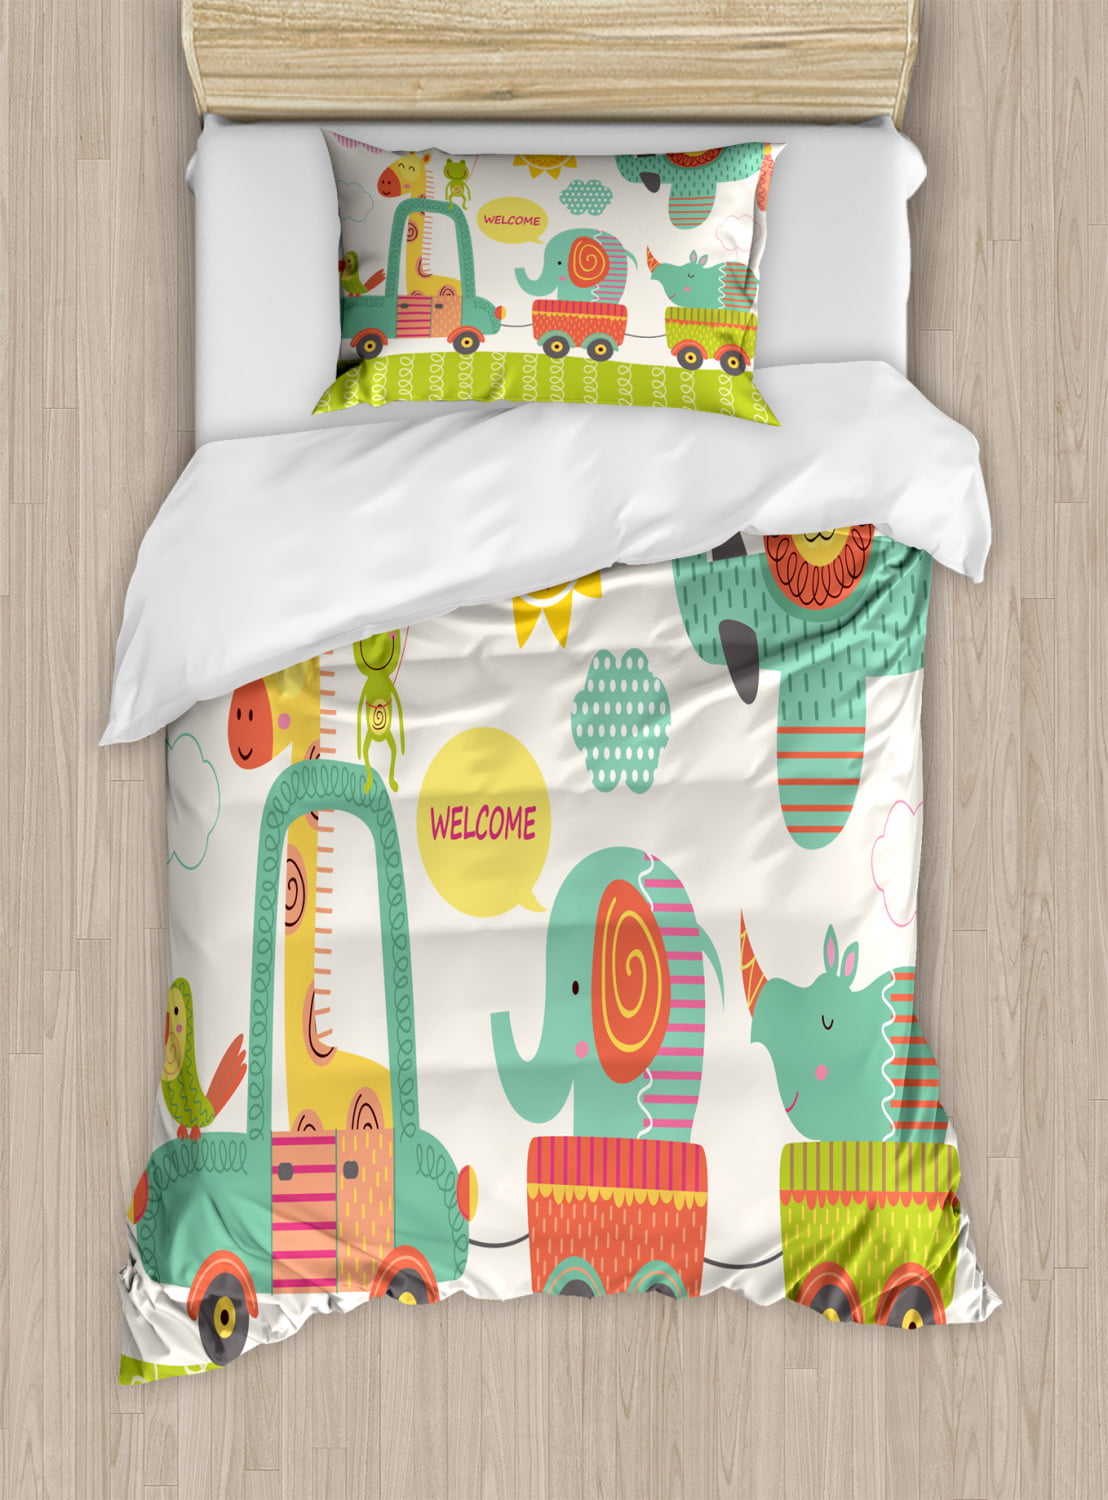 DUVET COVER 2PC TO FIT JUNIOR BED BABY BEDDING SET PILLOWCASE Jungle